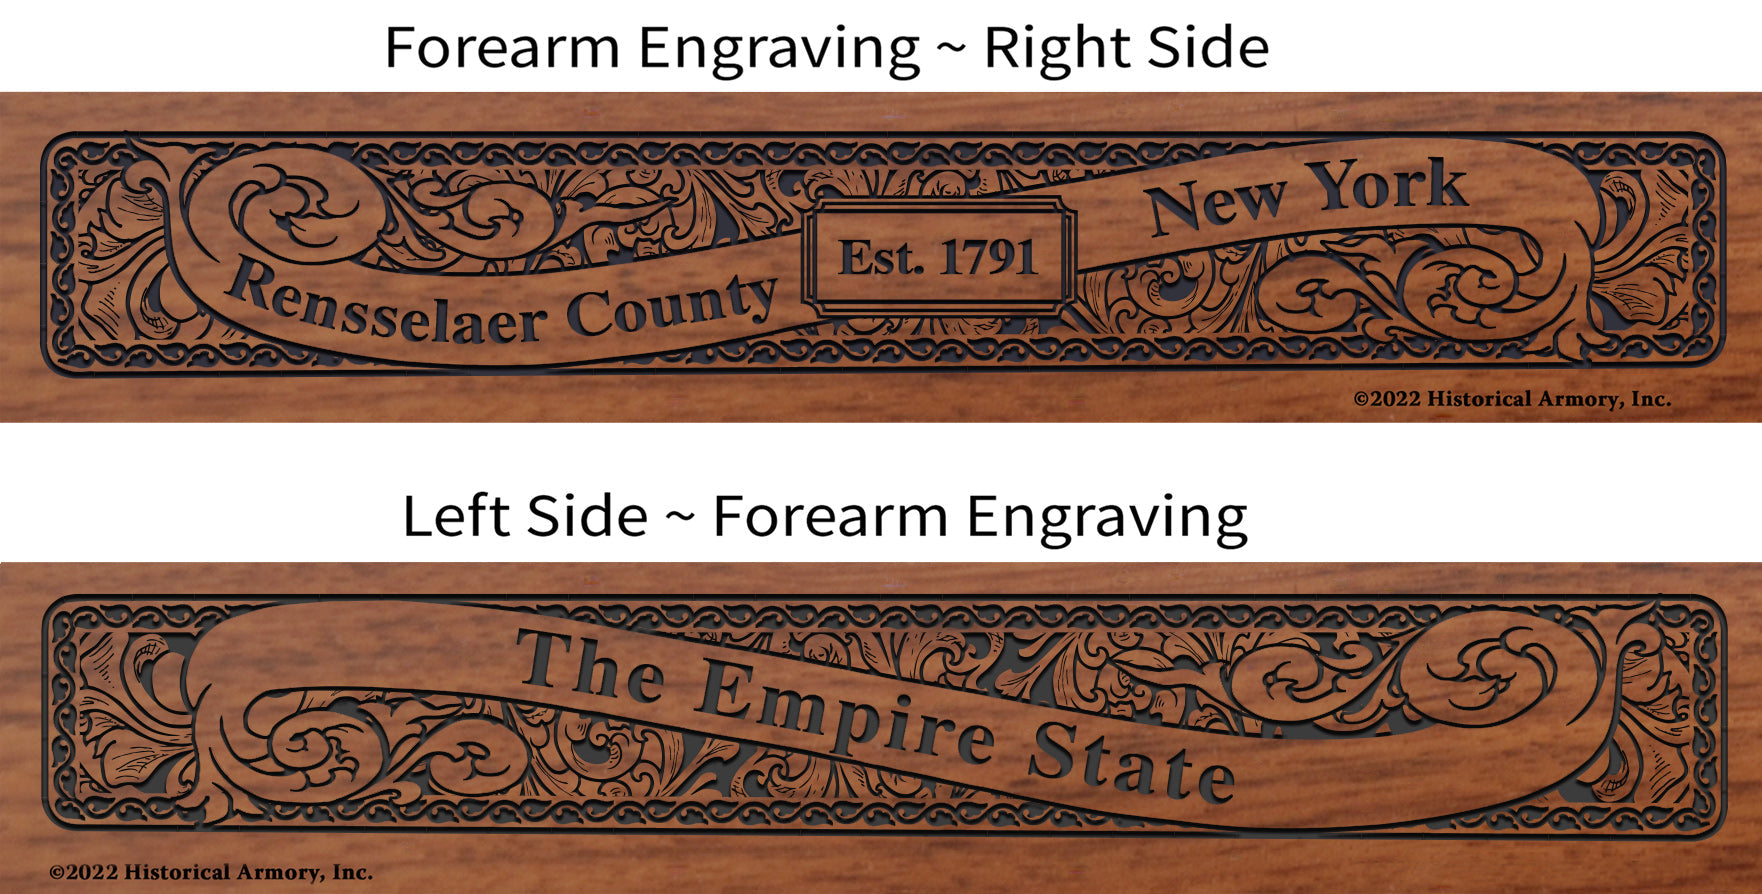 Rensselaer County New York Engraved Rifle Forearm